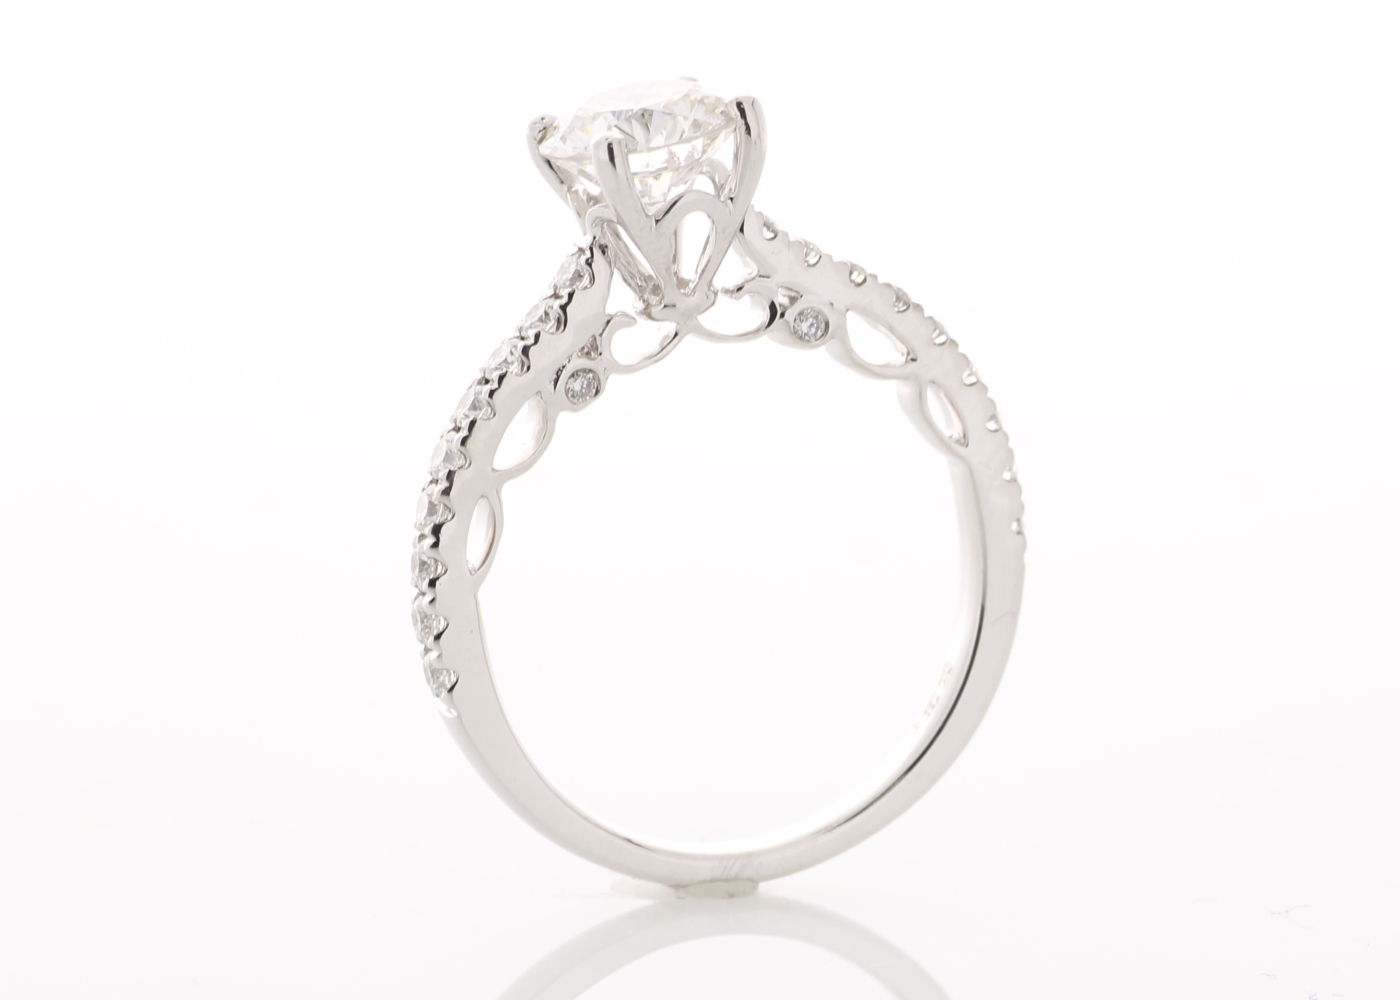 18ct White Gold Diamond Ring With Stone Set Shoulders 1.46 Carats - Image 5 of 6